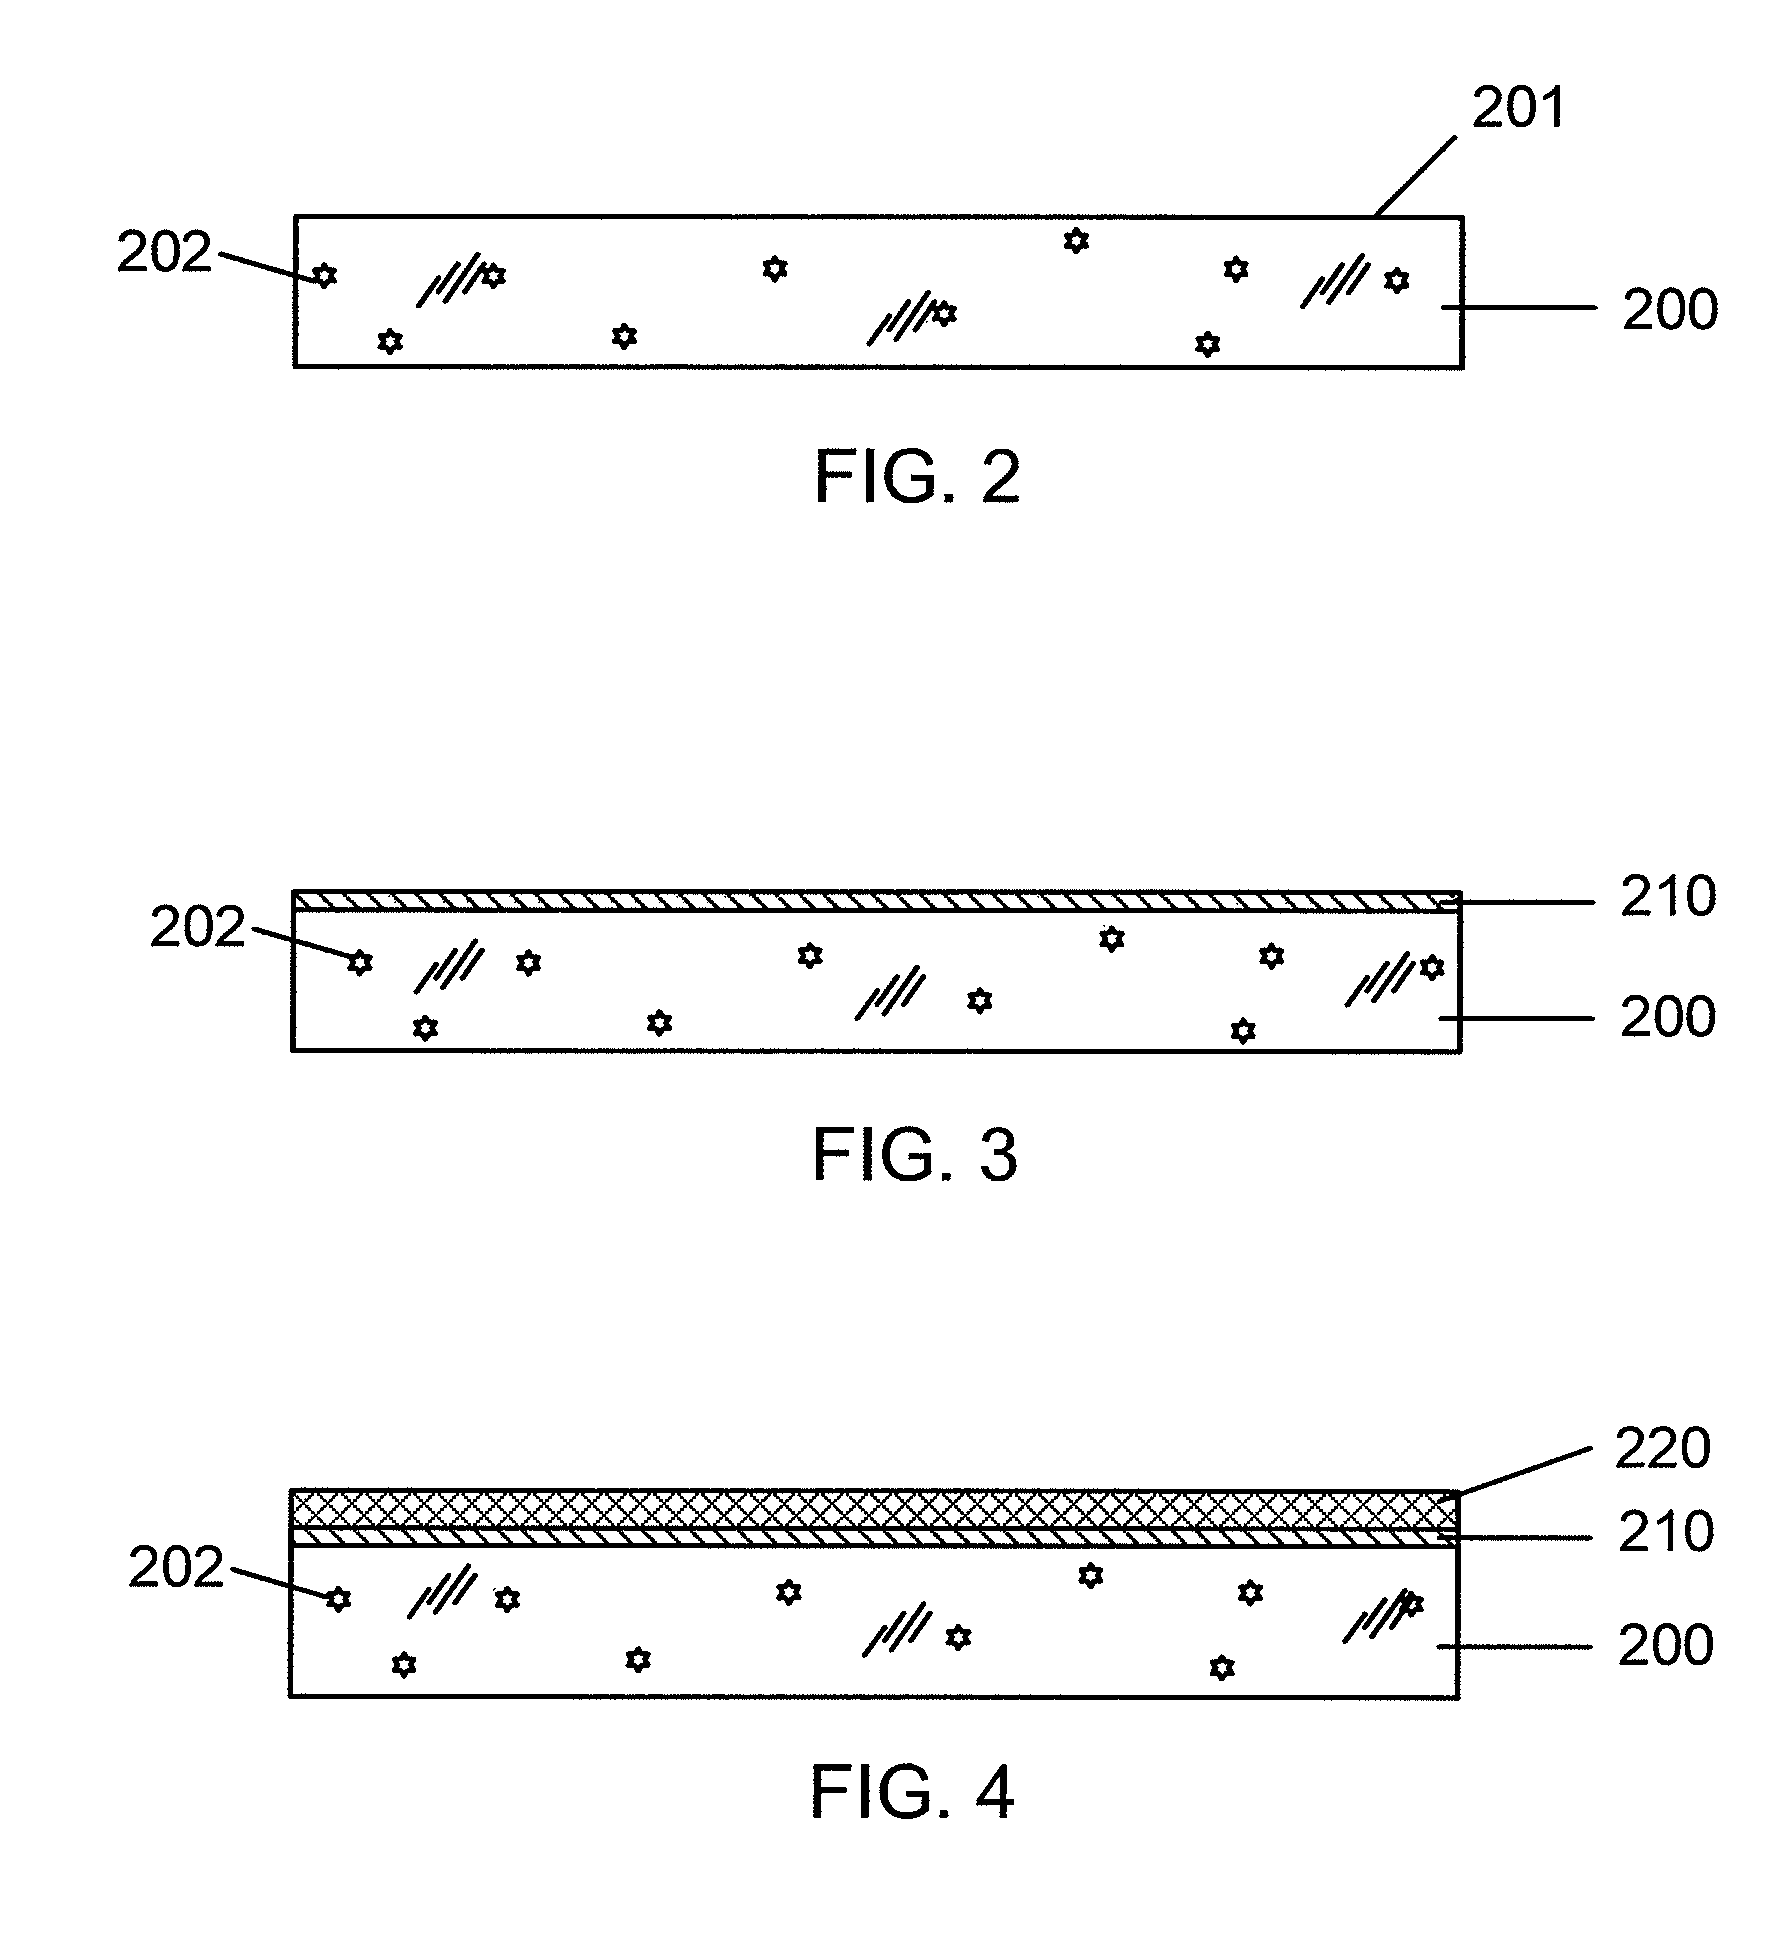 Method of manufacture of sodium doped CIGS/CIGSS absorber layers for high efficiency photovoltaic devices